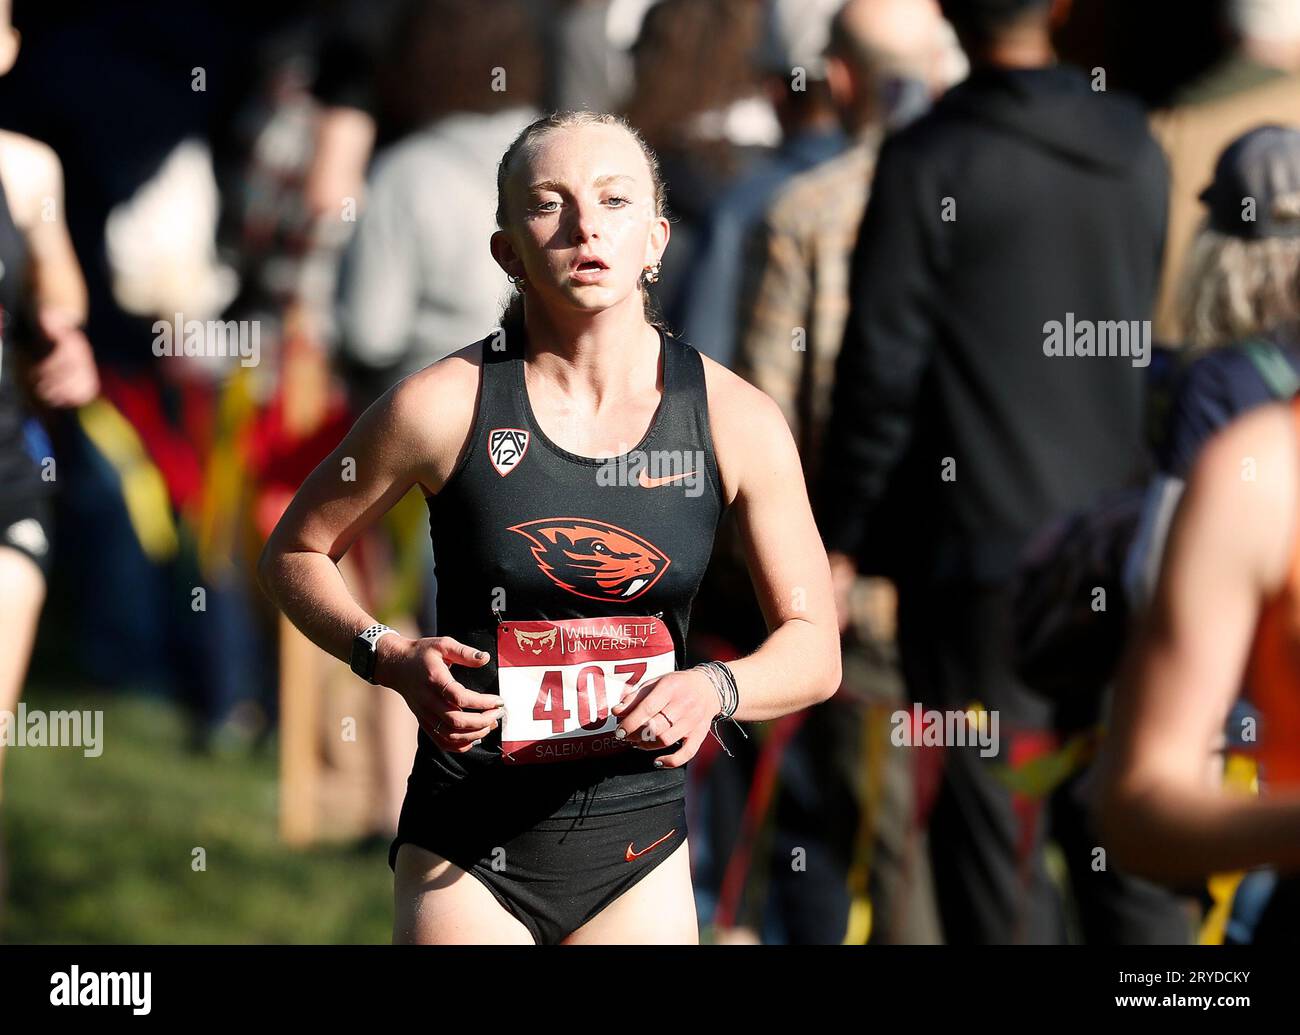 Bush Park, Salem, OR, USA. 30th Sep, 2023. Erin Cosgrove of Oregon State University competes at the 2023 Charles Bowles Invitational Cross Country meet at Bush Park, Salem, OR. Larry C. Lawson/CSM/Alamy Live News Stock Photo